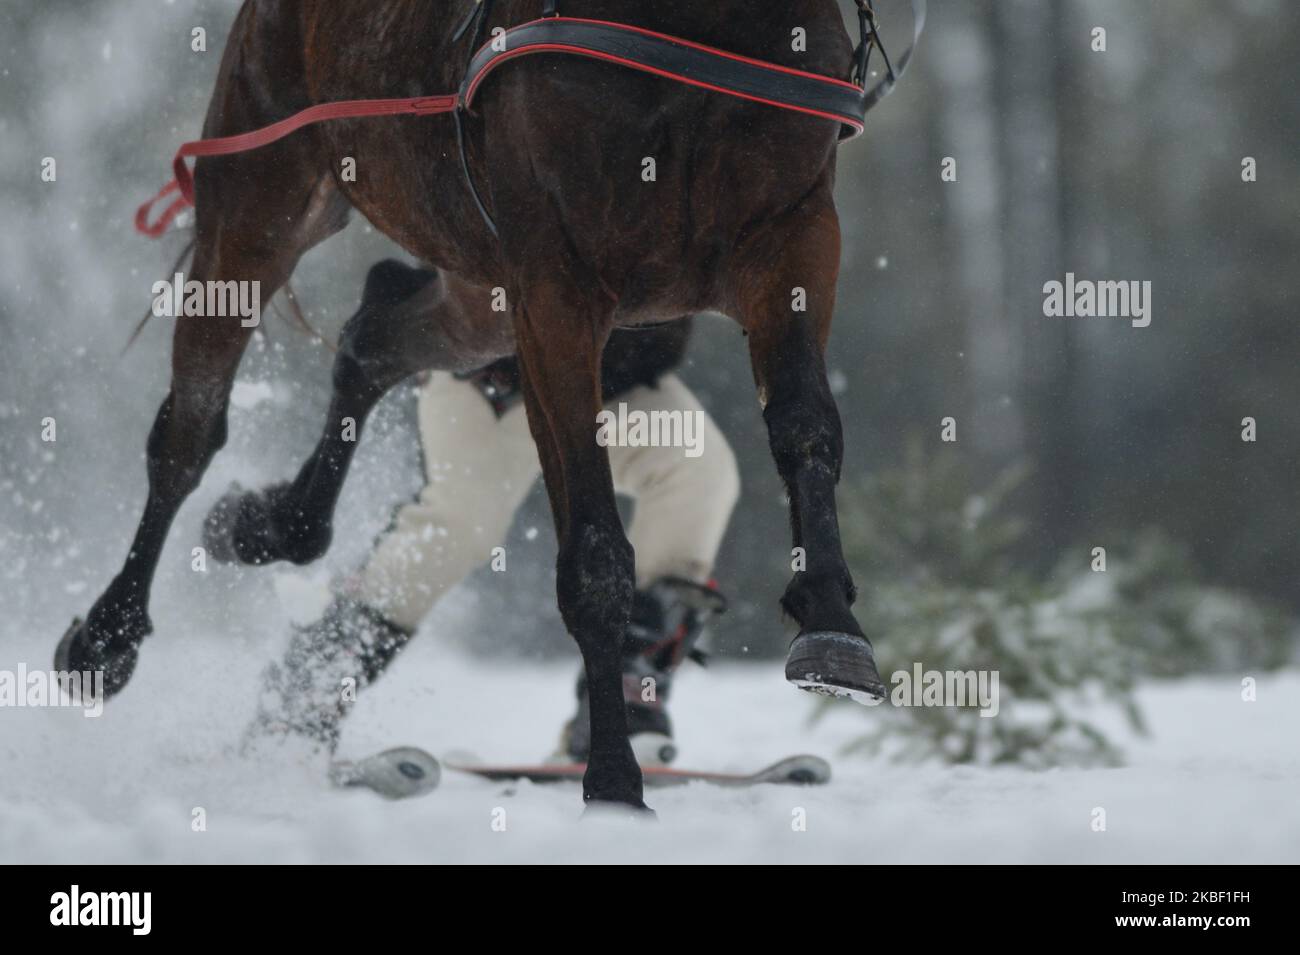 Stanislaw Rzadkosz-Pulka skiing behind 'Dworny Pan', in category skiring (skier behind a horse without rider), during the 2020 Edition of Kumoterki in Poronin Kumoterki. On Sunday, January 19, 2019, in Male Ciche Lichajowki, Poronin, Poland. (Photo by Artur Widak/NurPhoto) Stock Photo